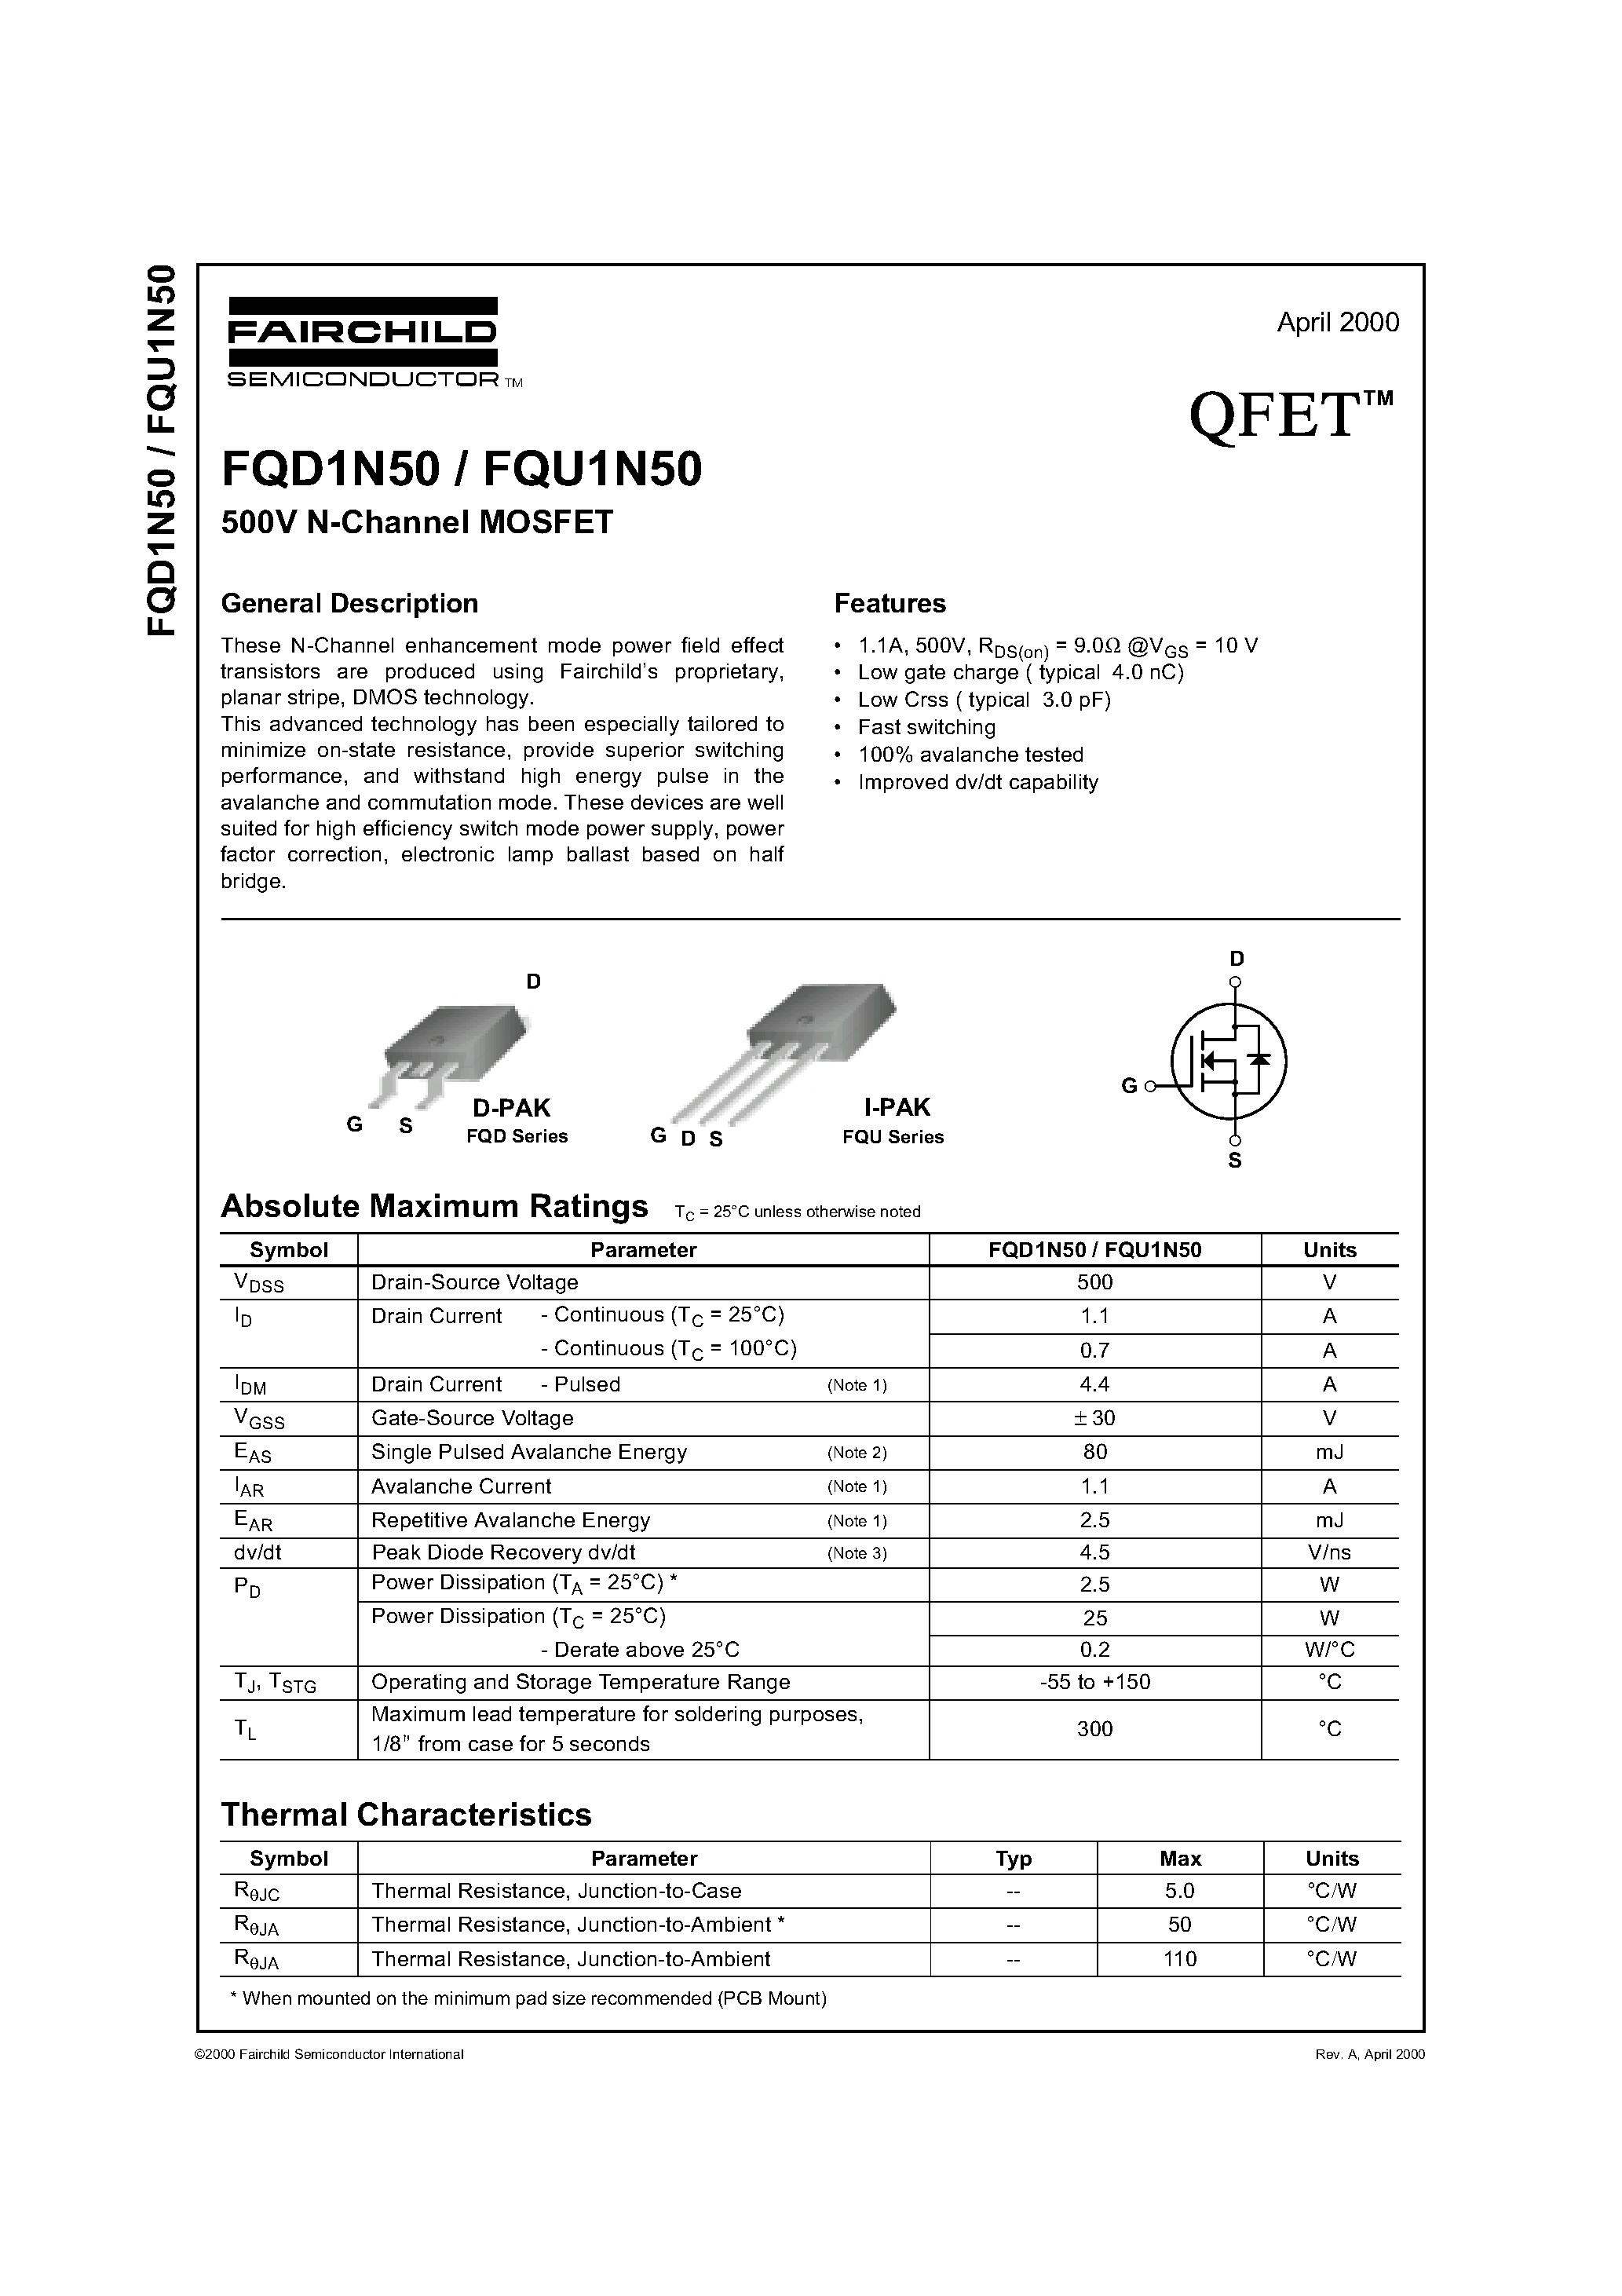 Datasheet FQD1N50 - 500V N-Channel MOSFET page 1